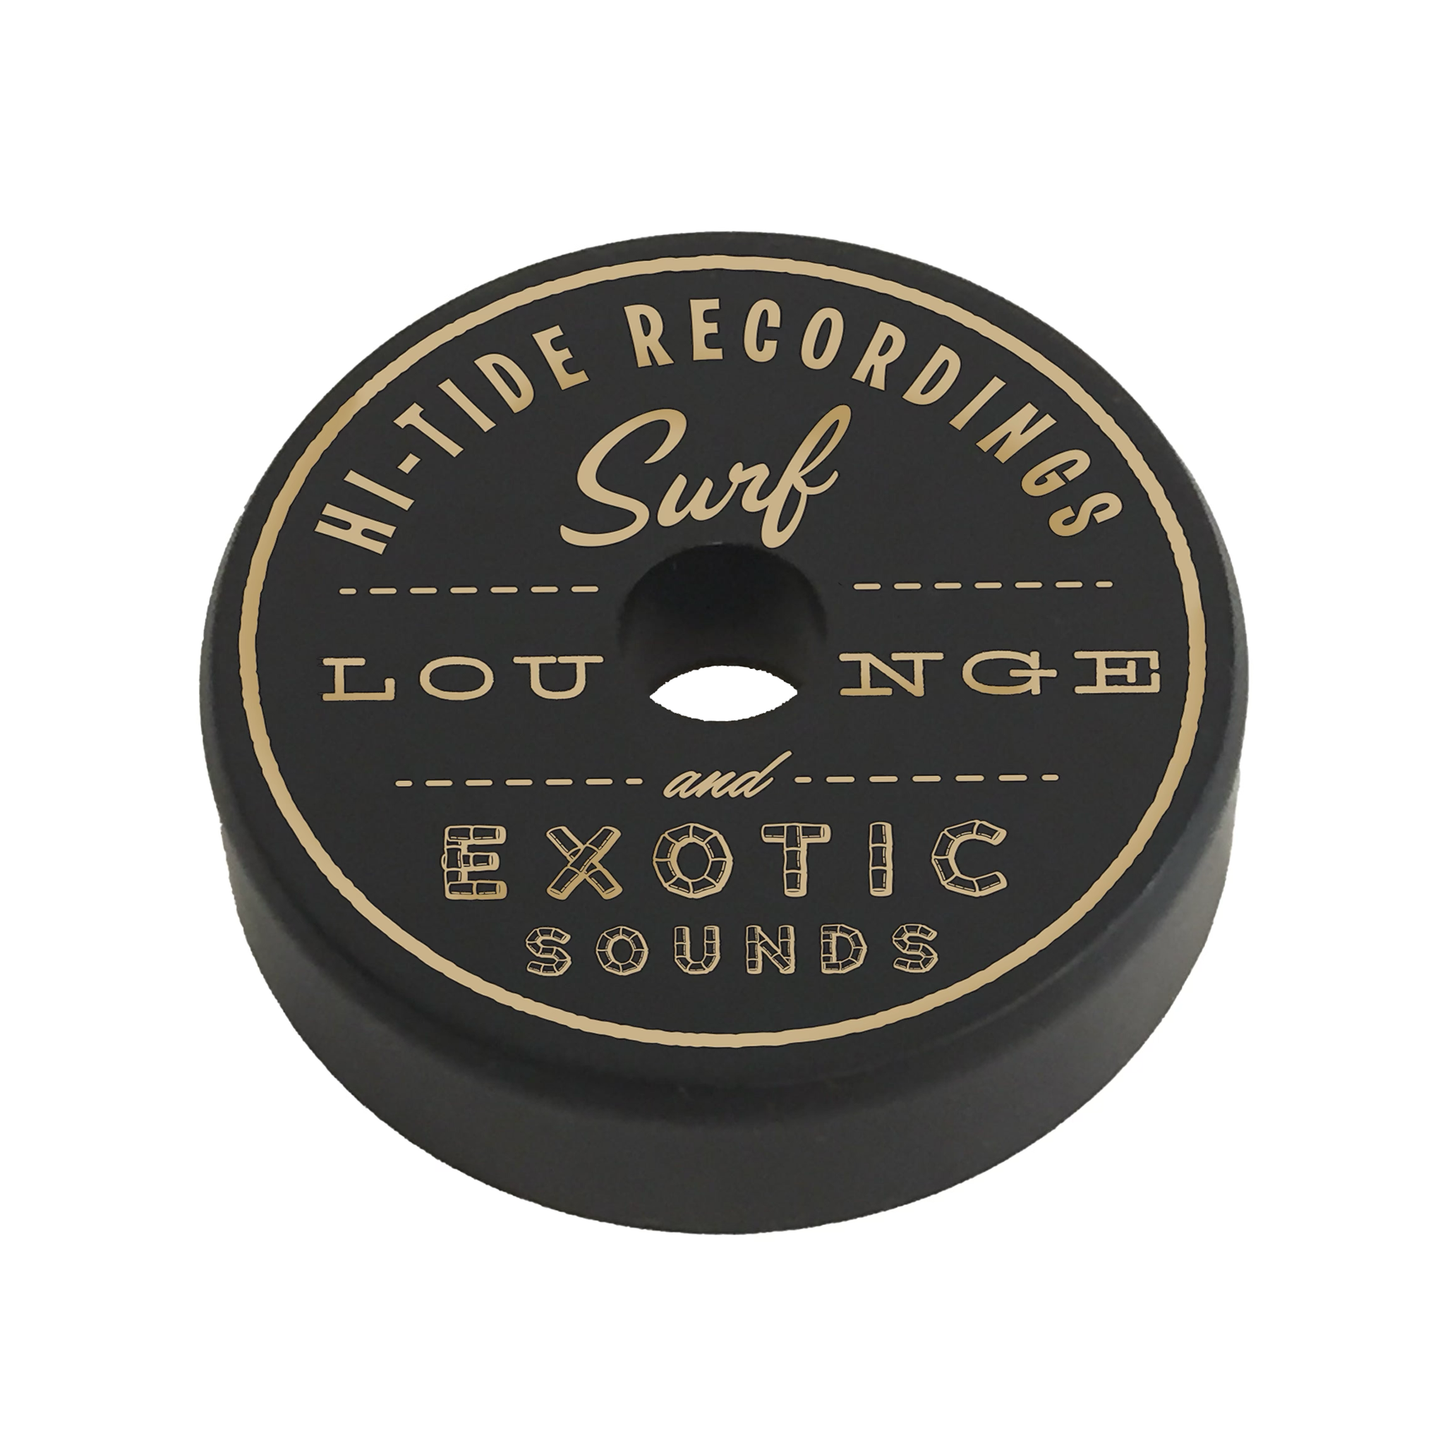 Hi-Tide Recordings "Surf, Lounge & Exotic Sounds" 45 Adapter